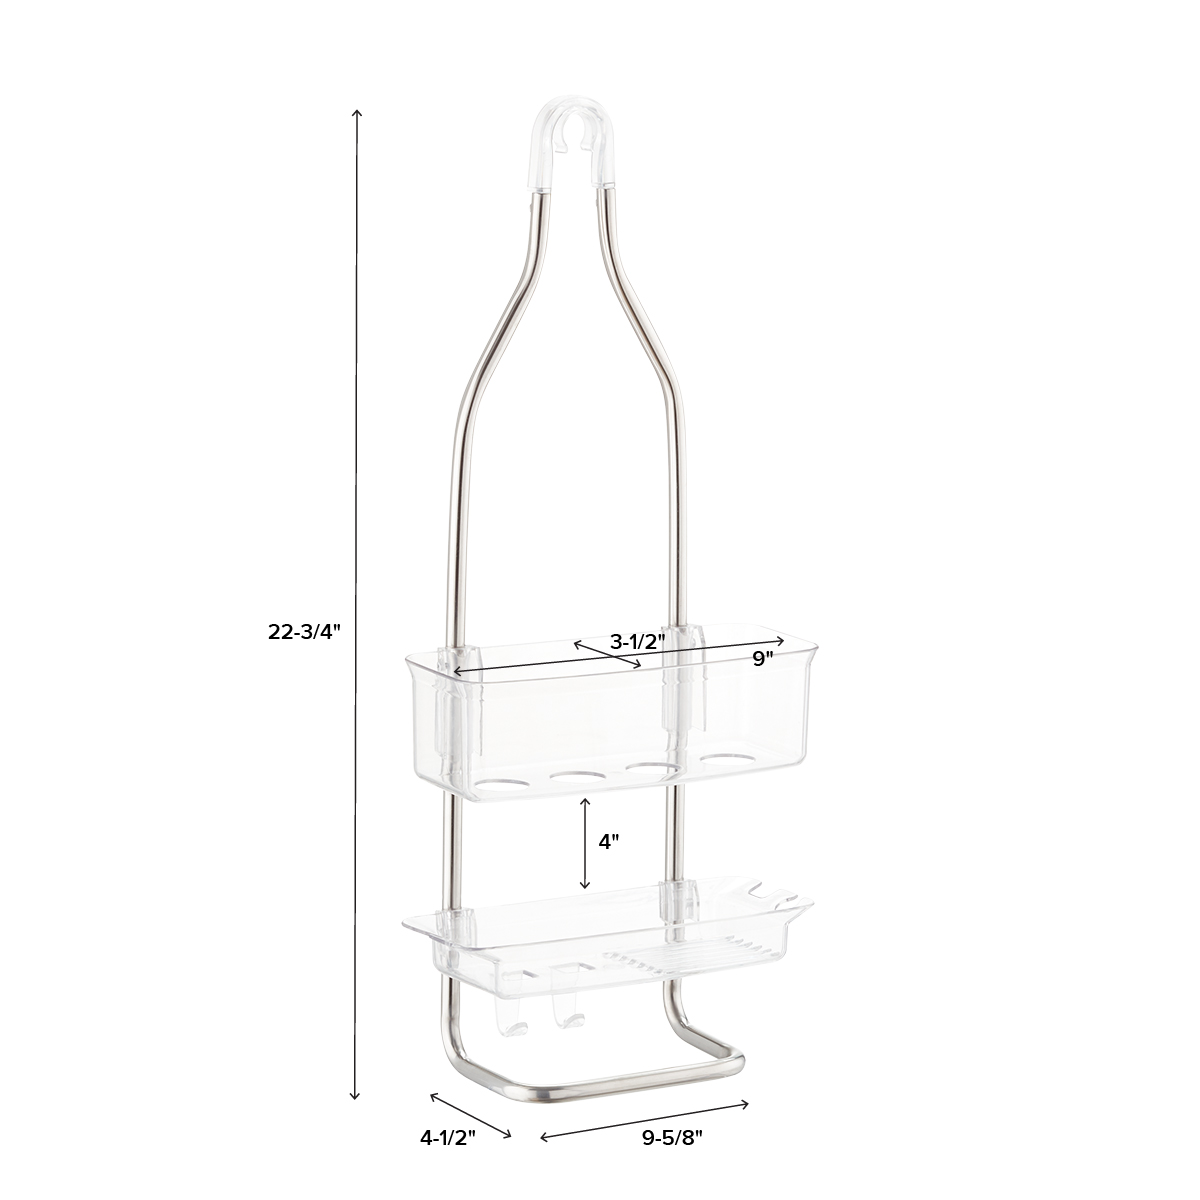 https://www.containerstore.com/catalogimages/449230/10073839-simplex-shower-caddy-clear-.jpg